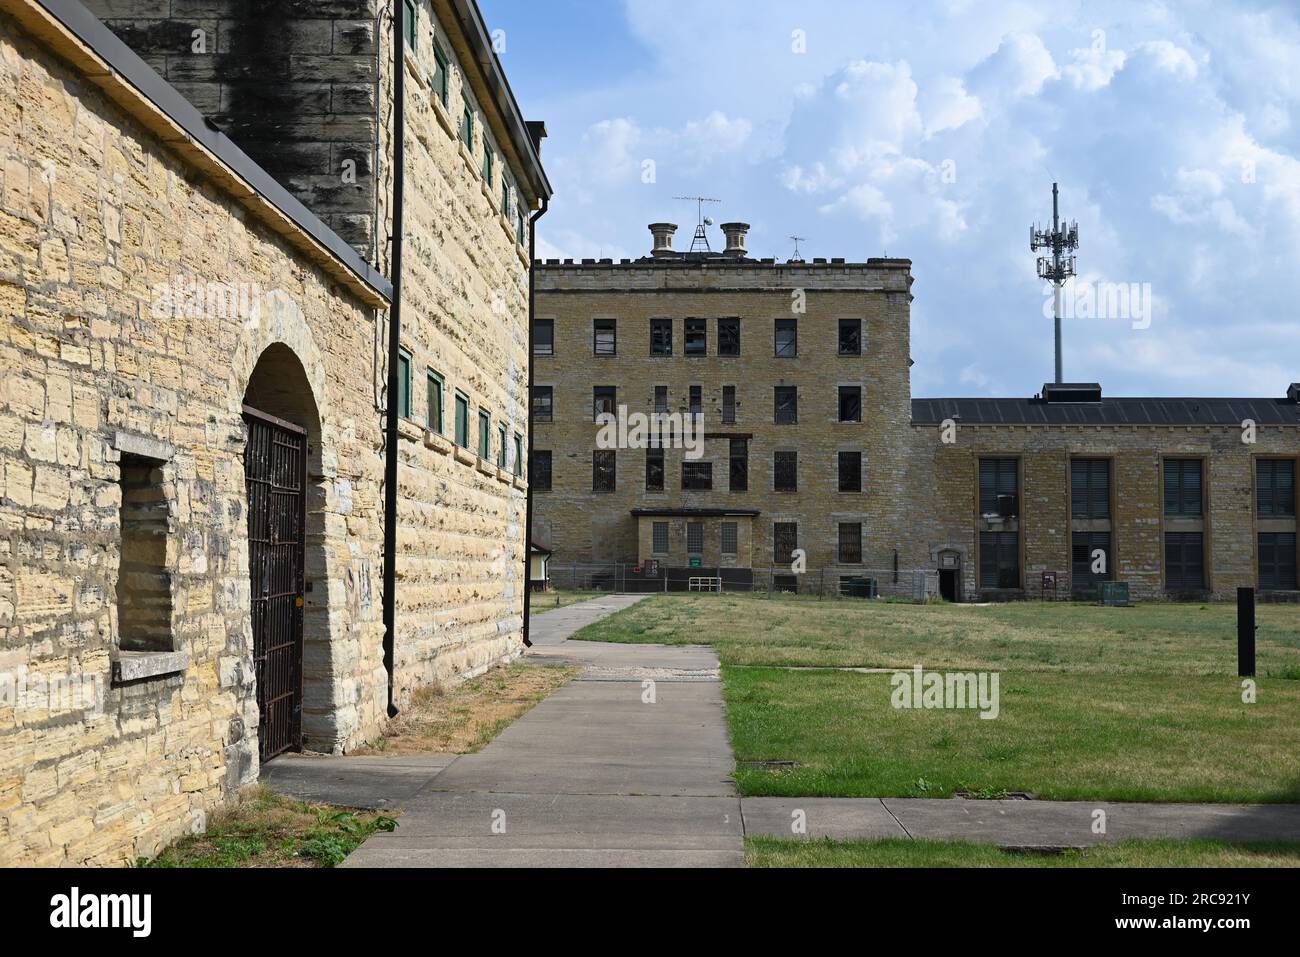 Looking past the Death Row House to the old cell block building at the Old Joliet Prison, which opened in 1858 and was closed and abandoned in 2002. Stock Photo